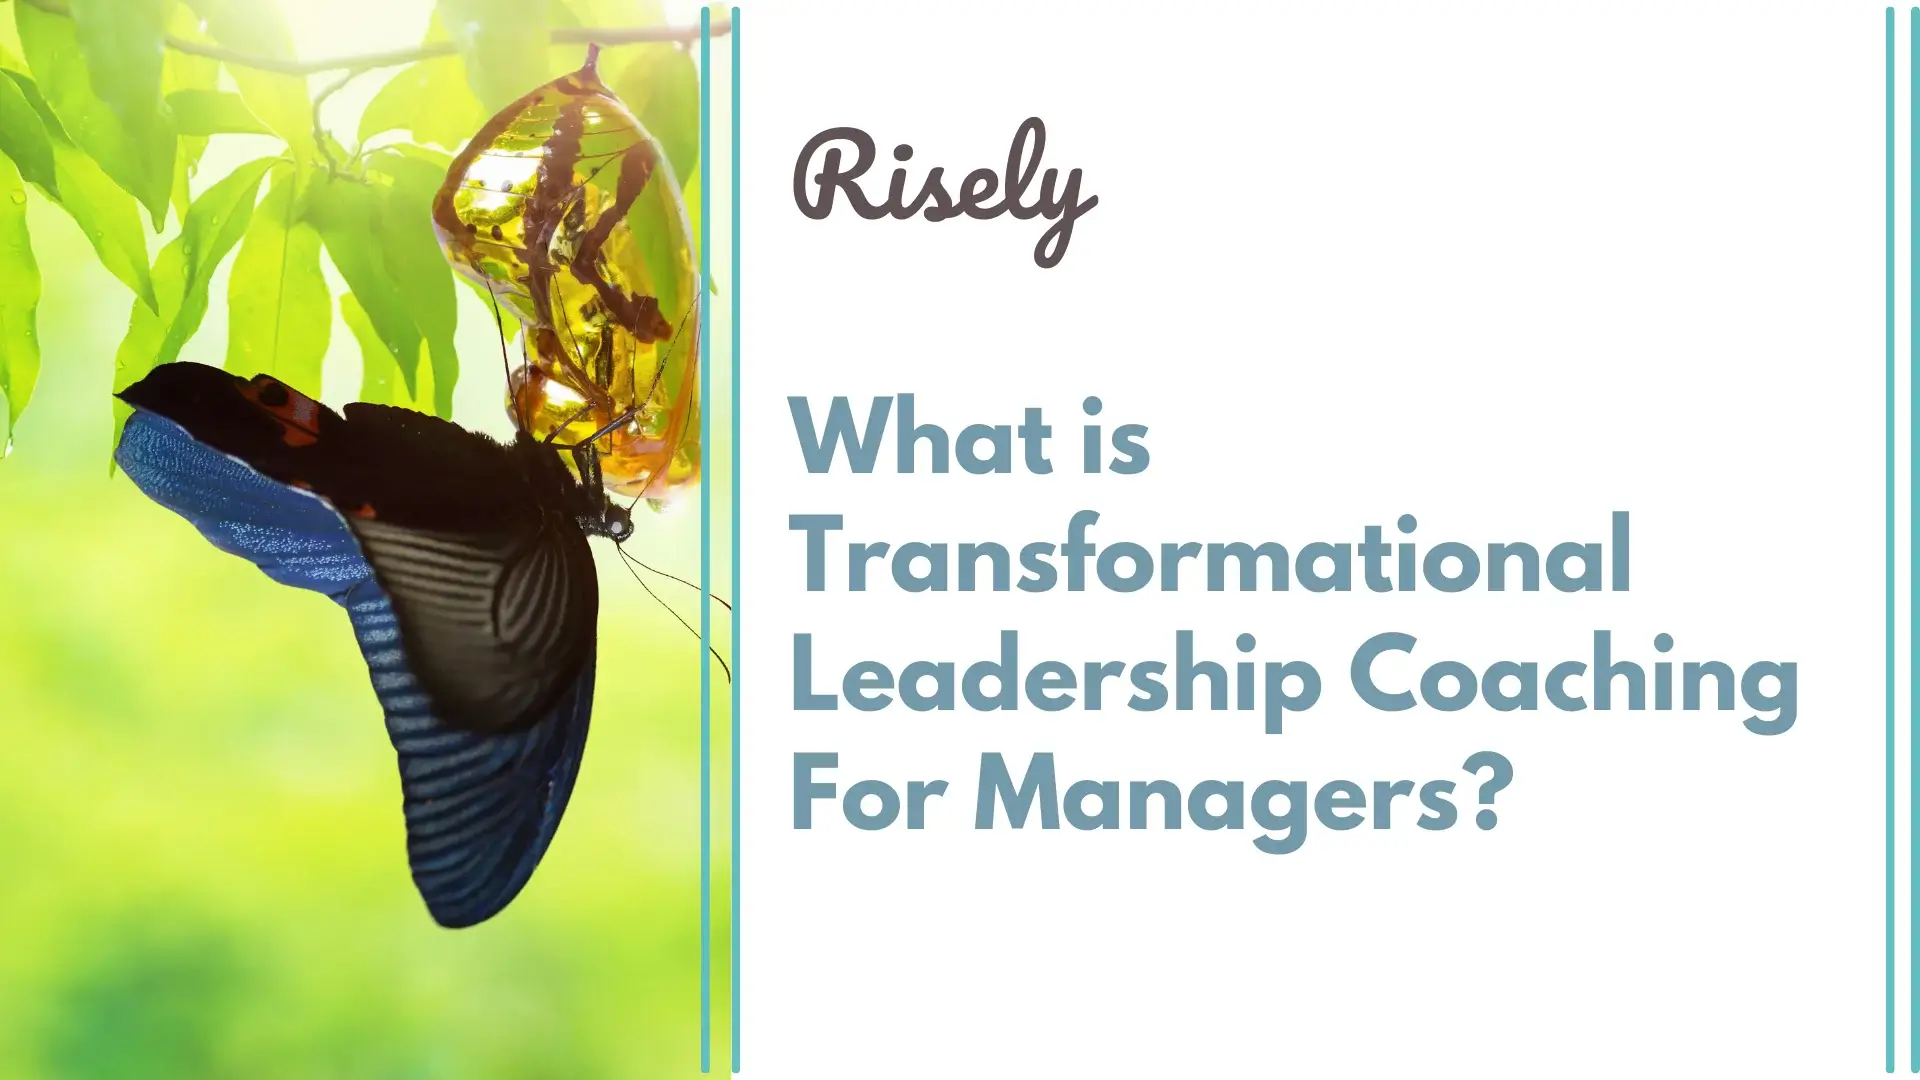 Transformational Leadership Coaching For Managers